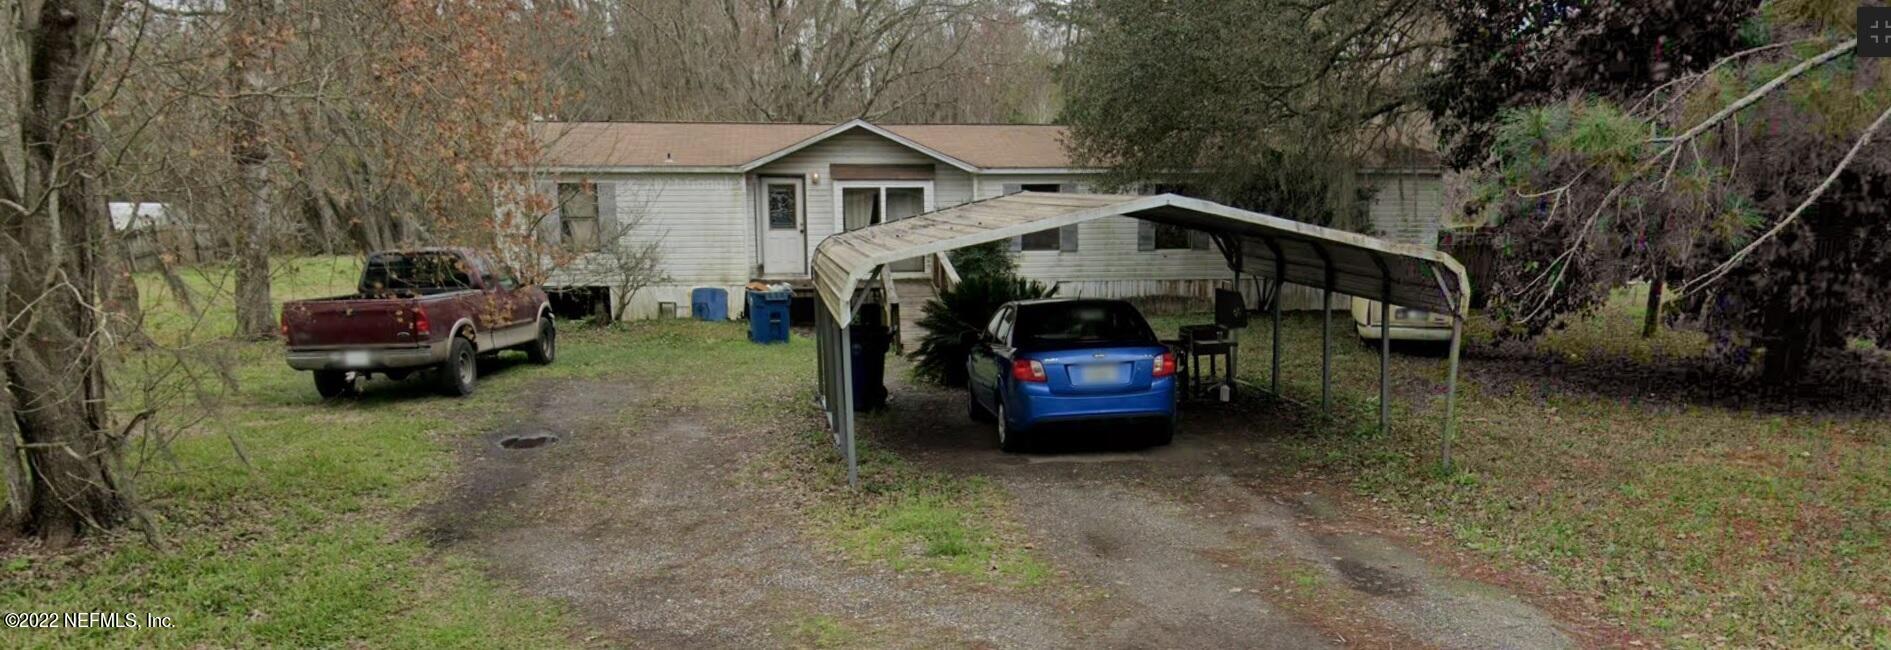 a view of a car is parked in front of a house